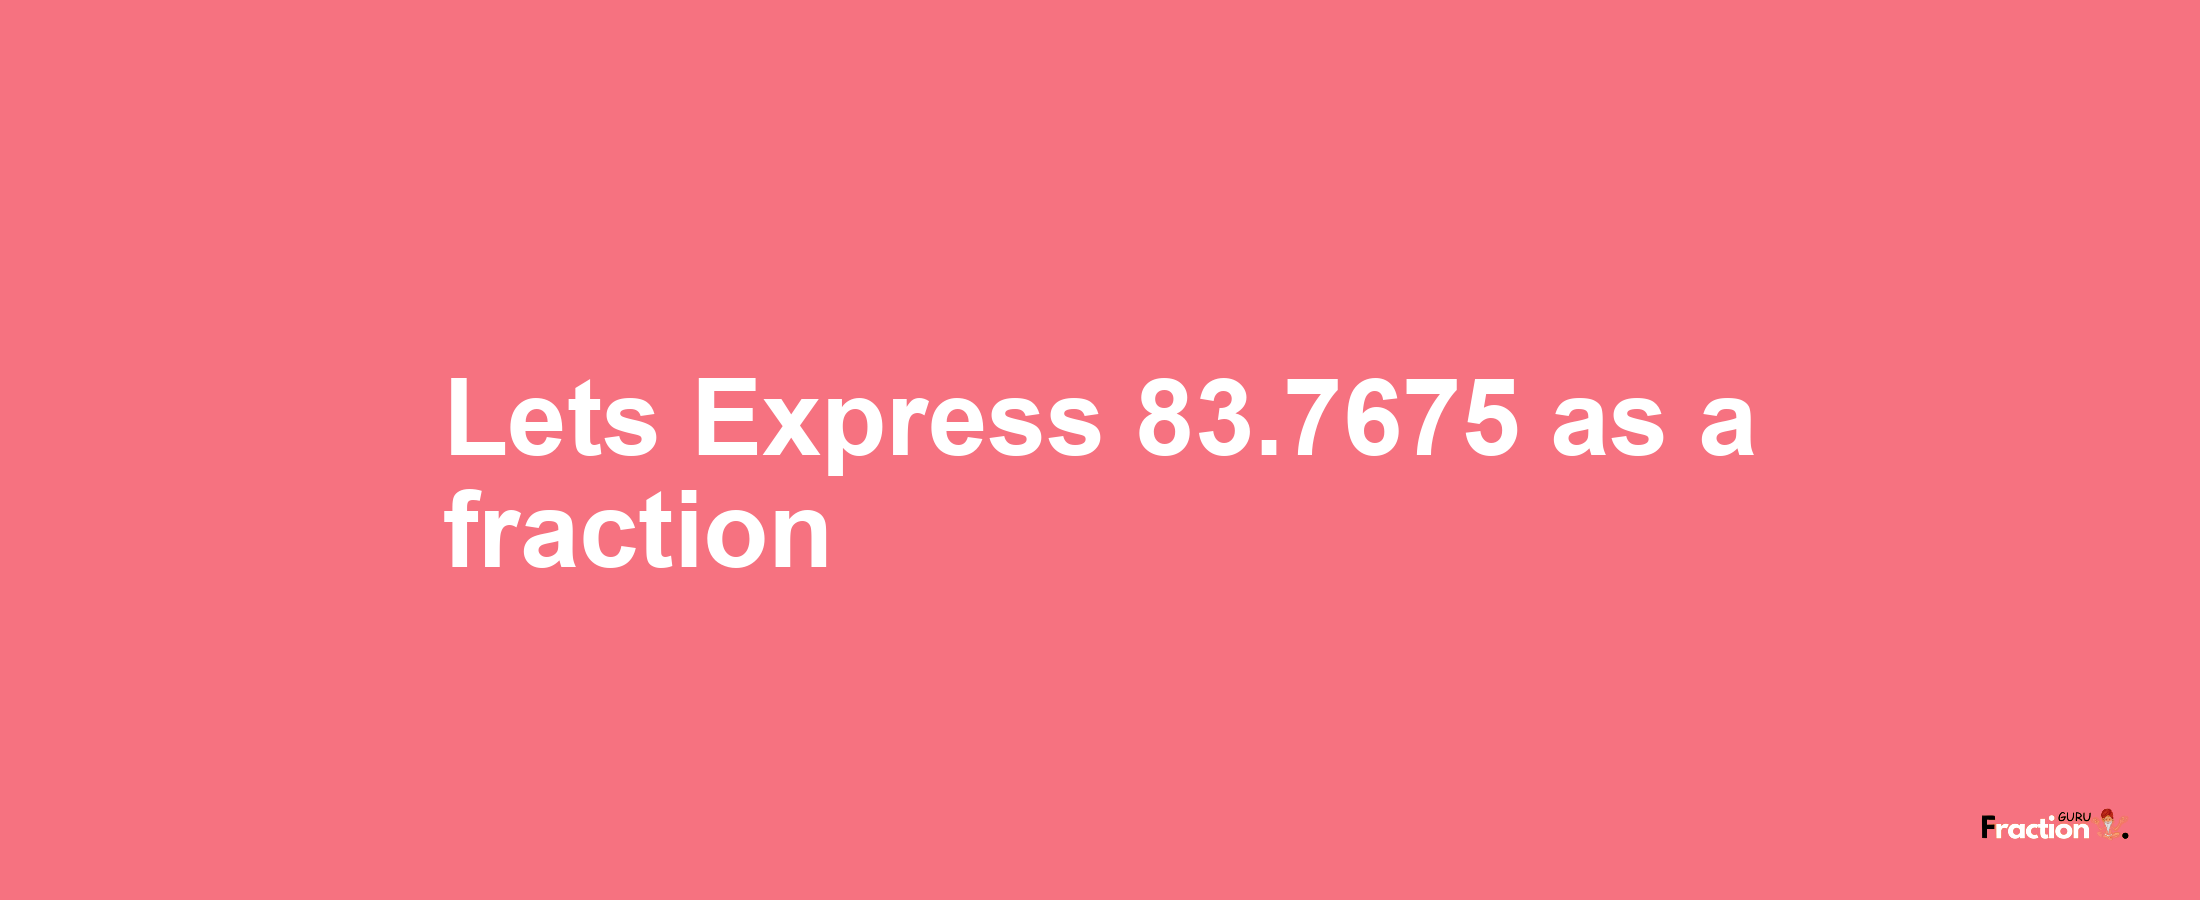 Lets Express 83.7675 as afraction